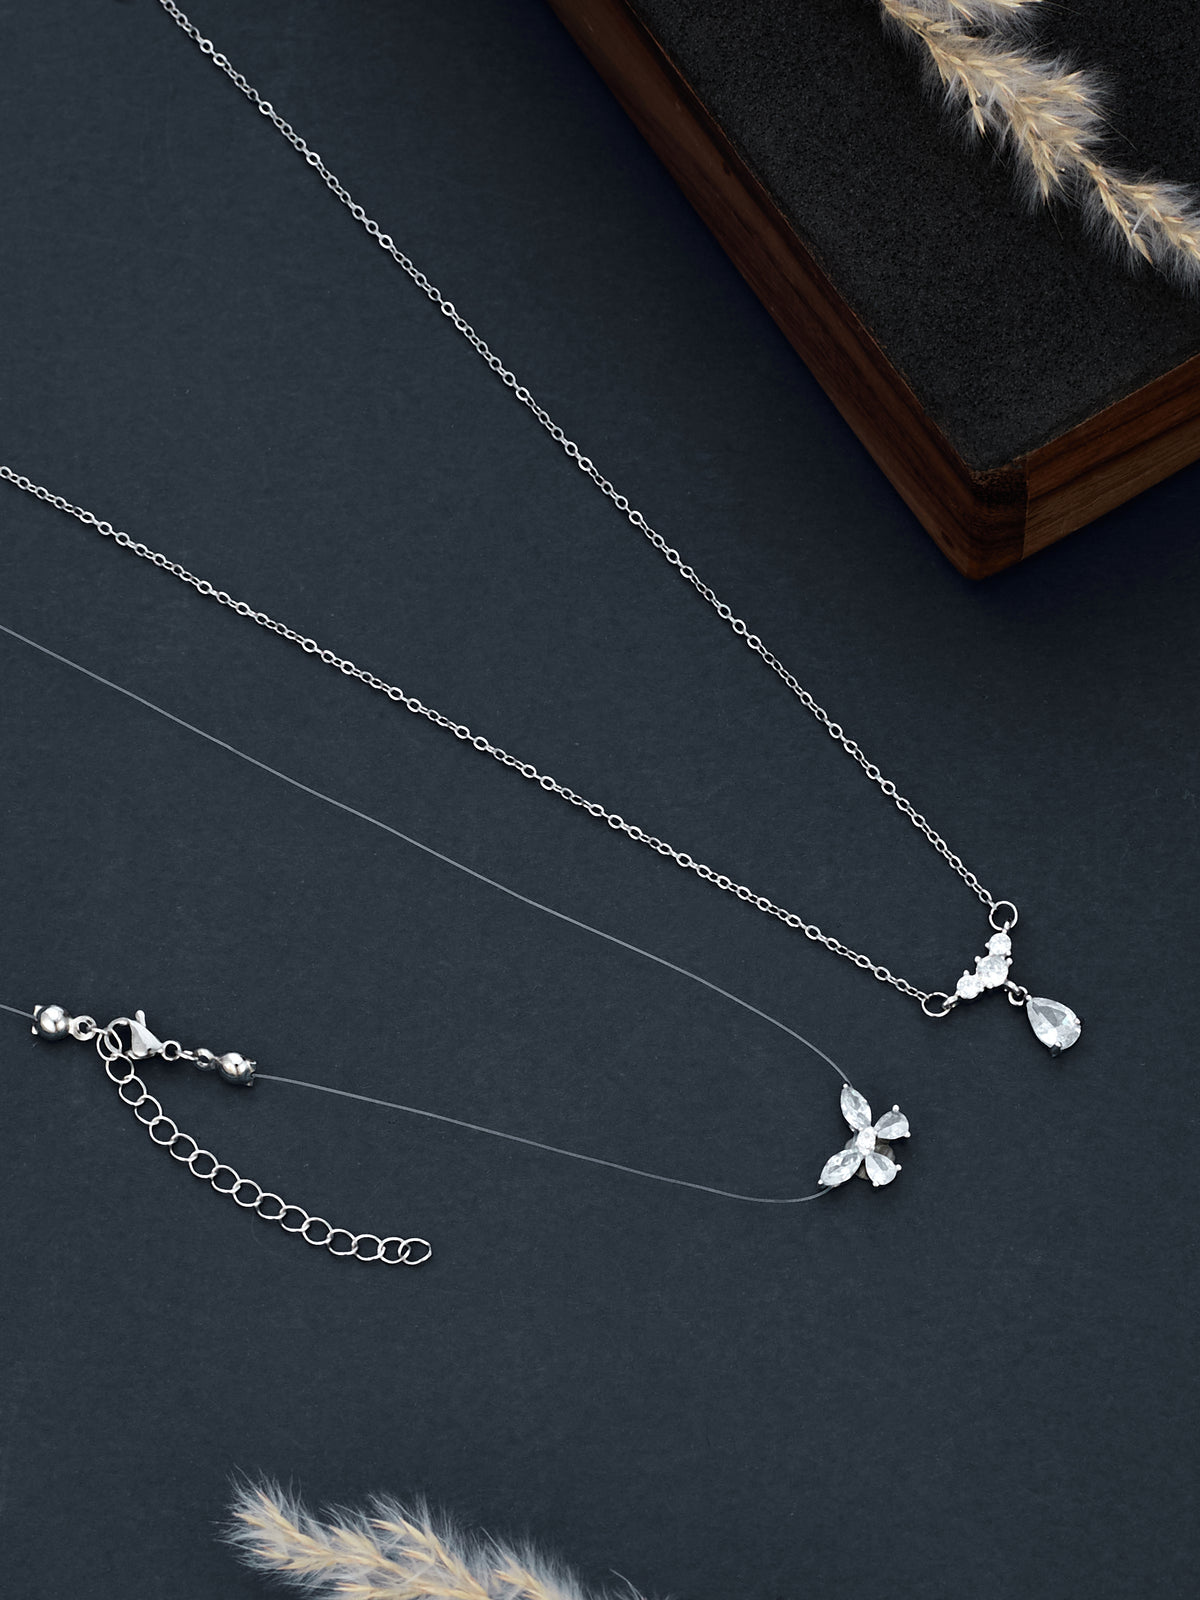 Lightweight Silver Plated Chain with Pendants for women & girls